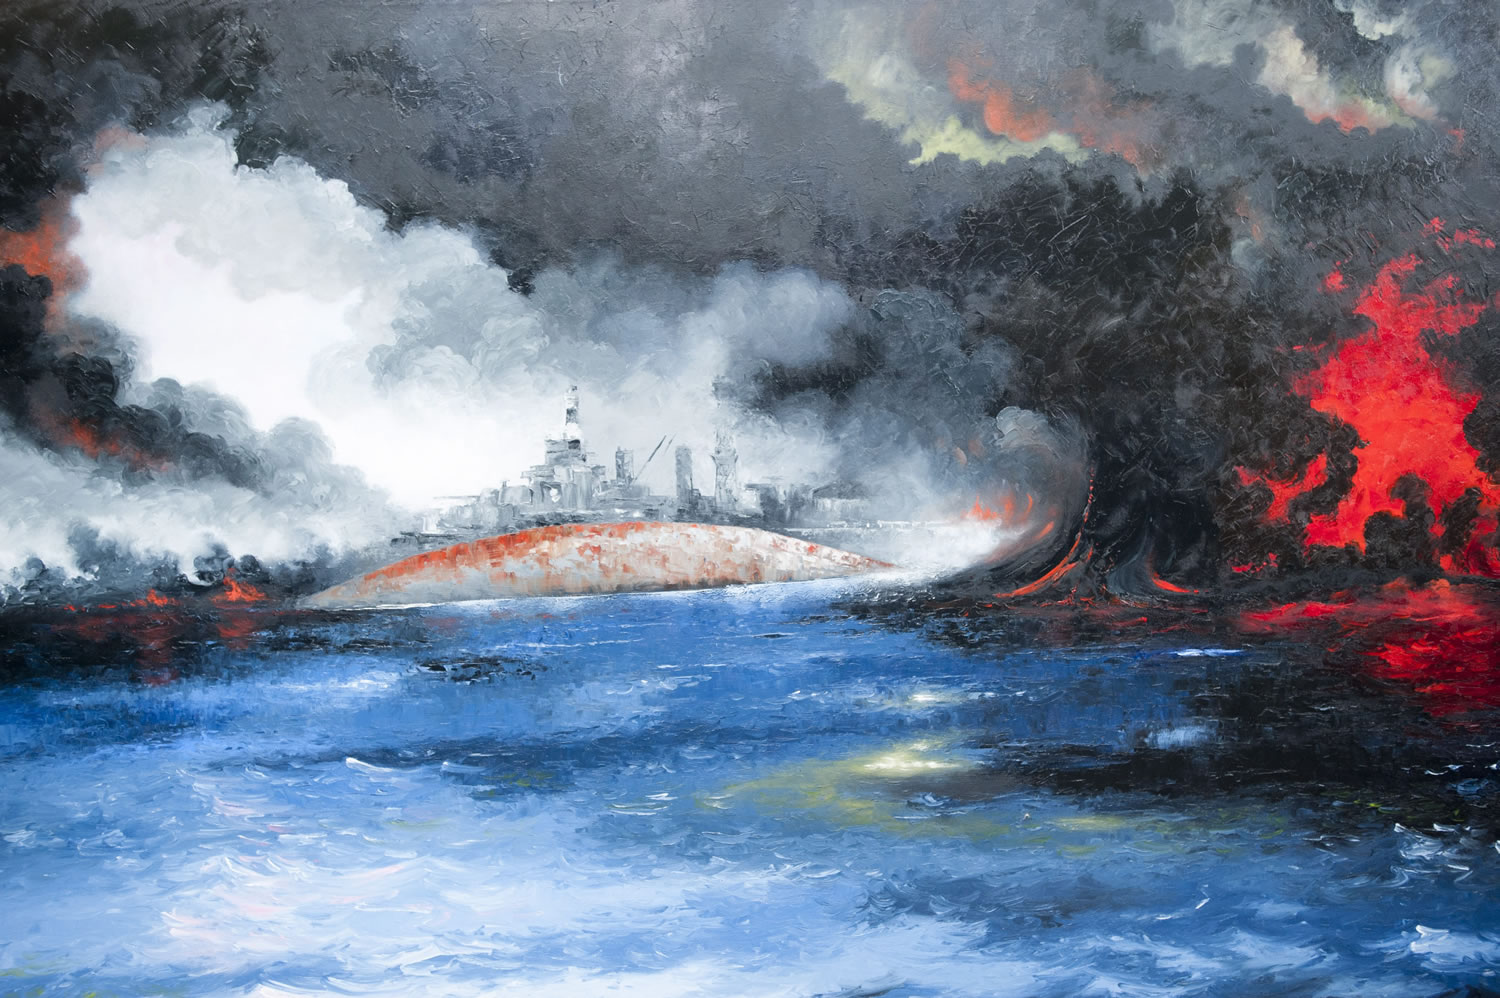 Gordon Sage painted his impressions of Pearl Harbor in the 1990s, some 50 years after the attack. His ship, the USS Maryland, is in the background, behind the hull of the USS Oklahoma.